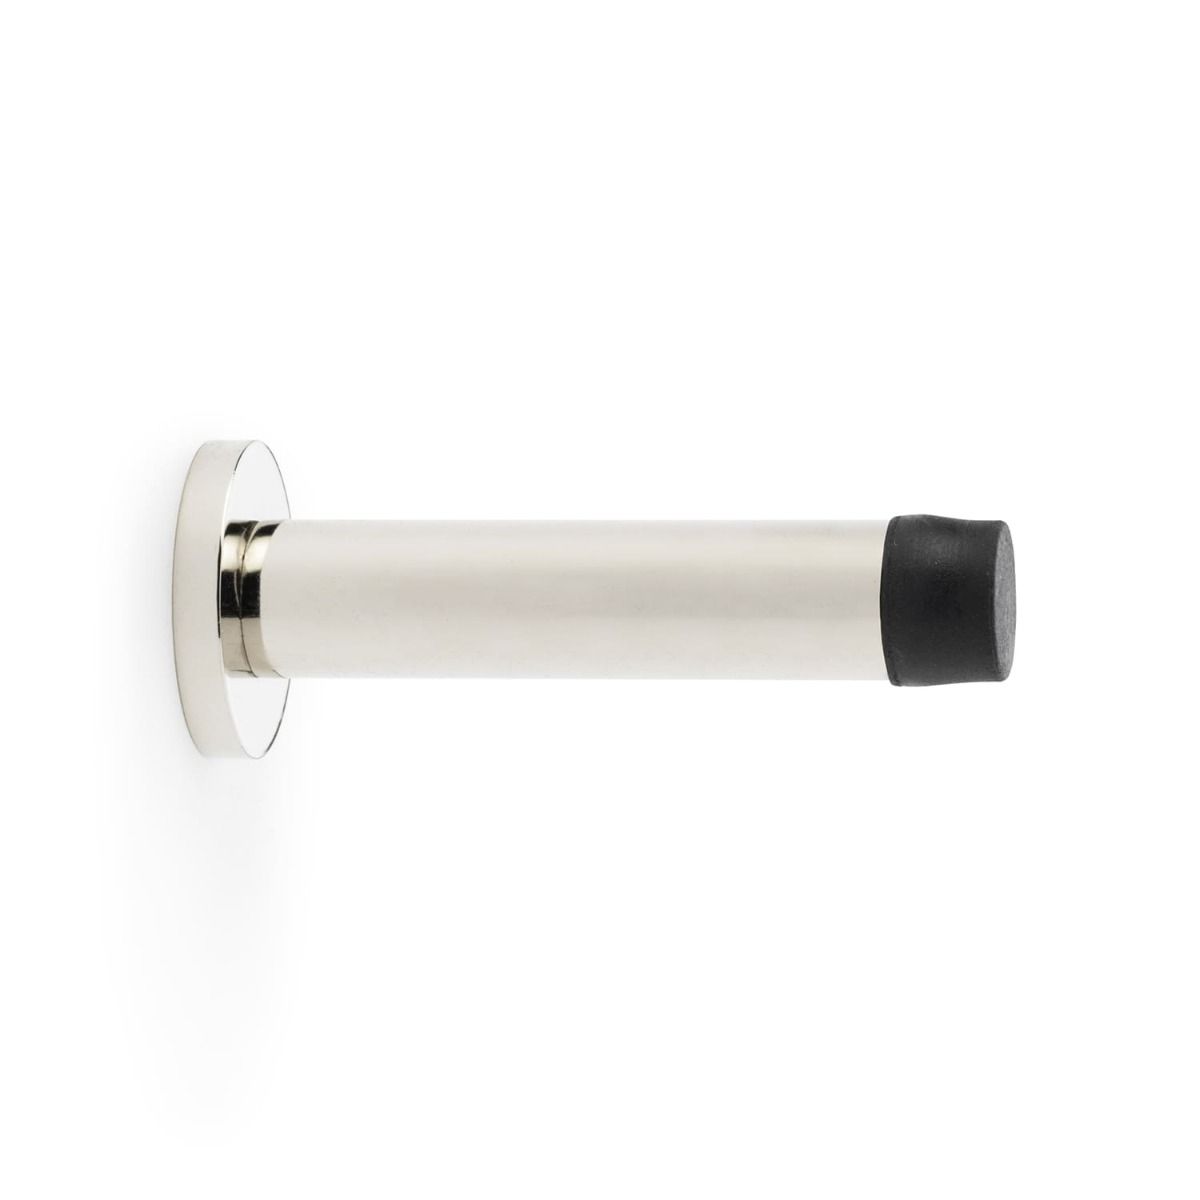 Alexander And Wilks Projection Cyl. Doorstop On Rose 75mm Polished Nickel AW616PN